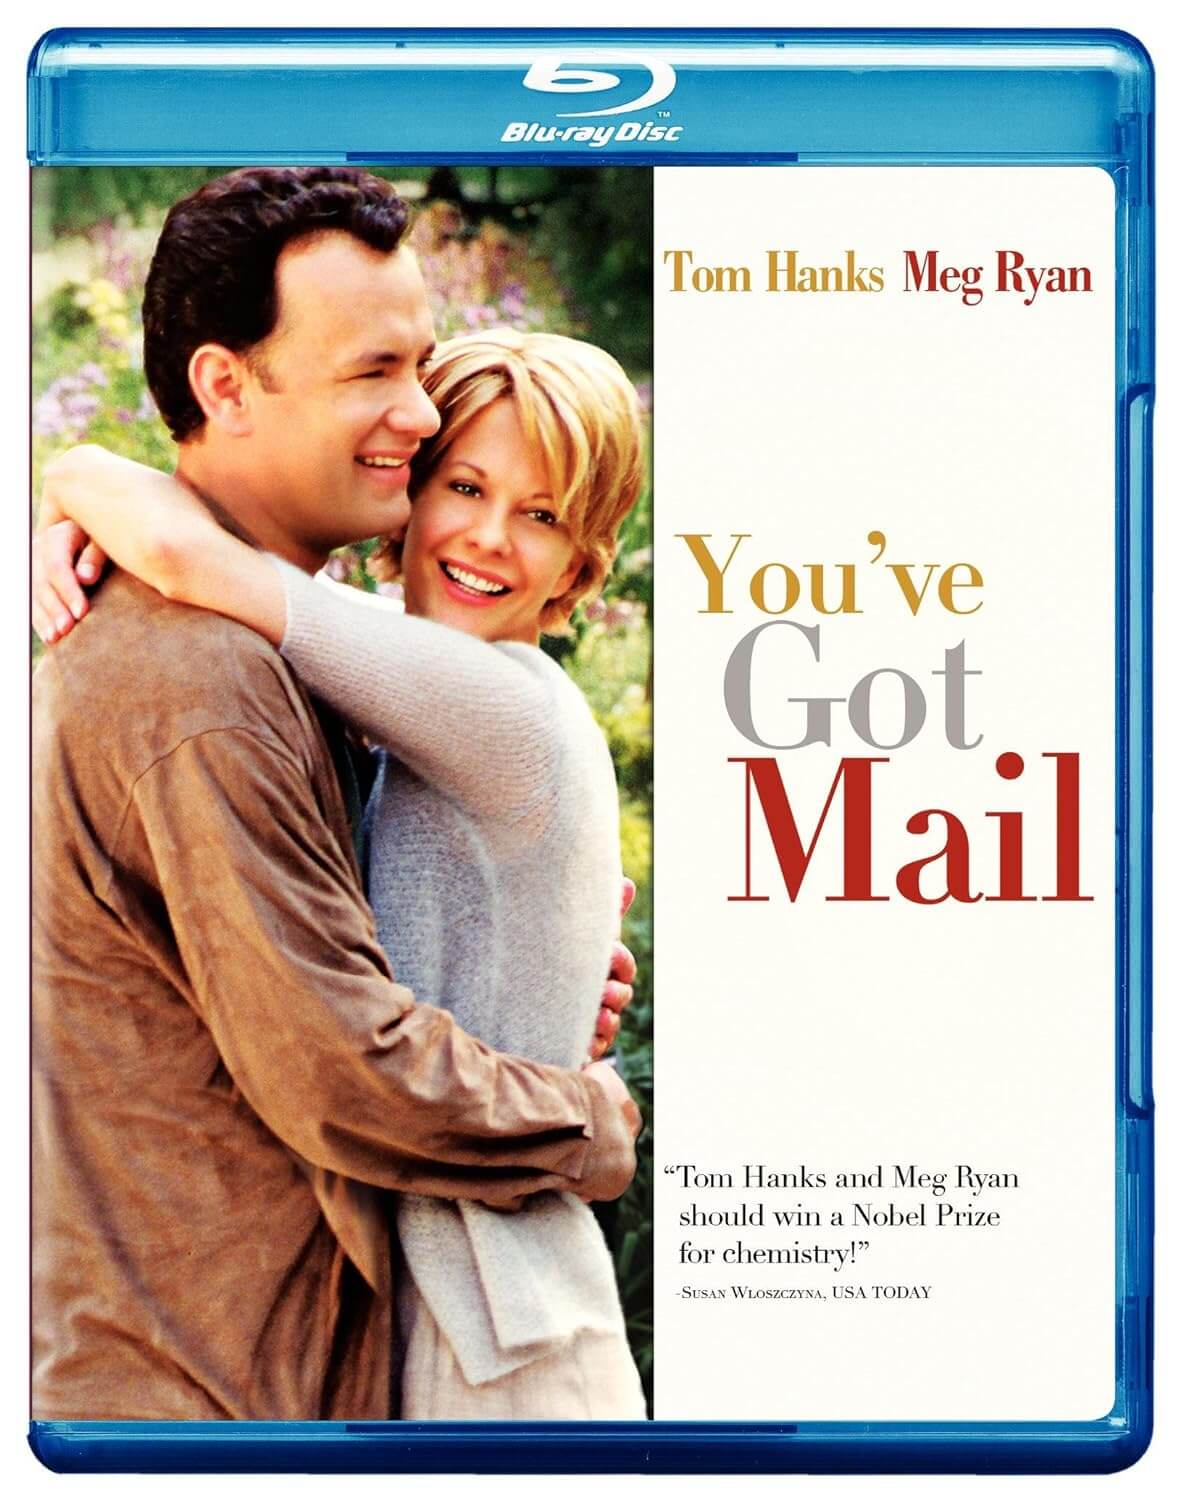 "You've Got Mail" (1998)